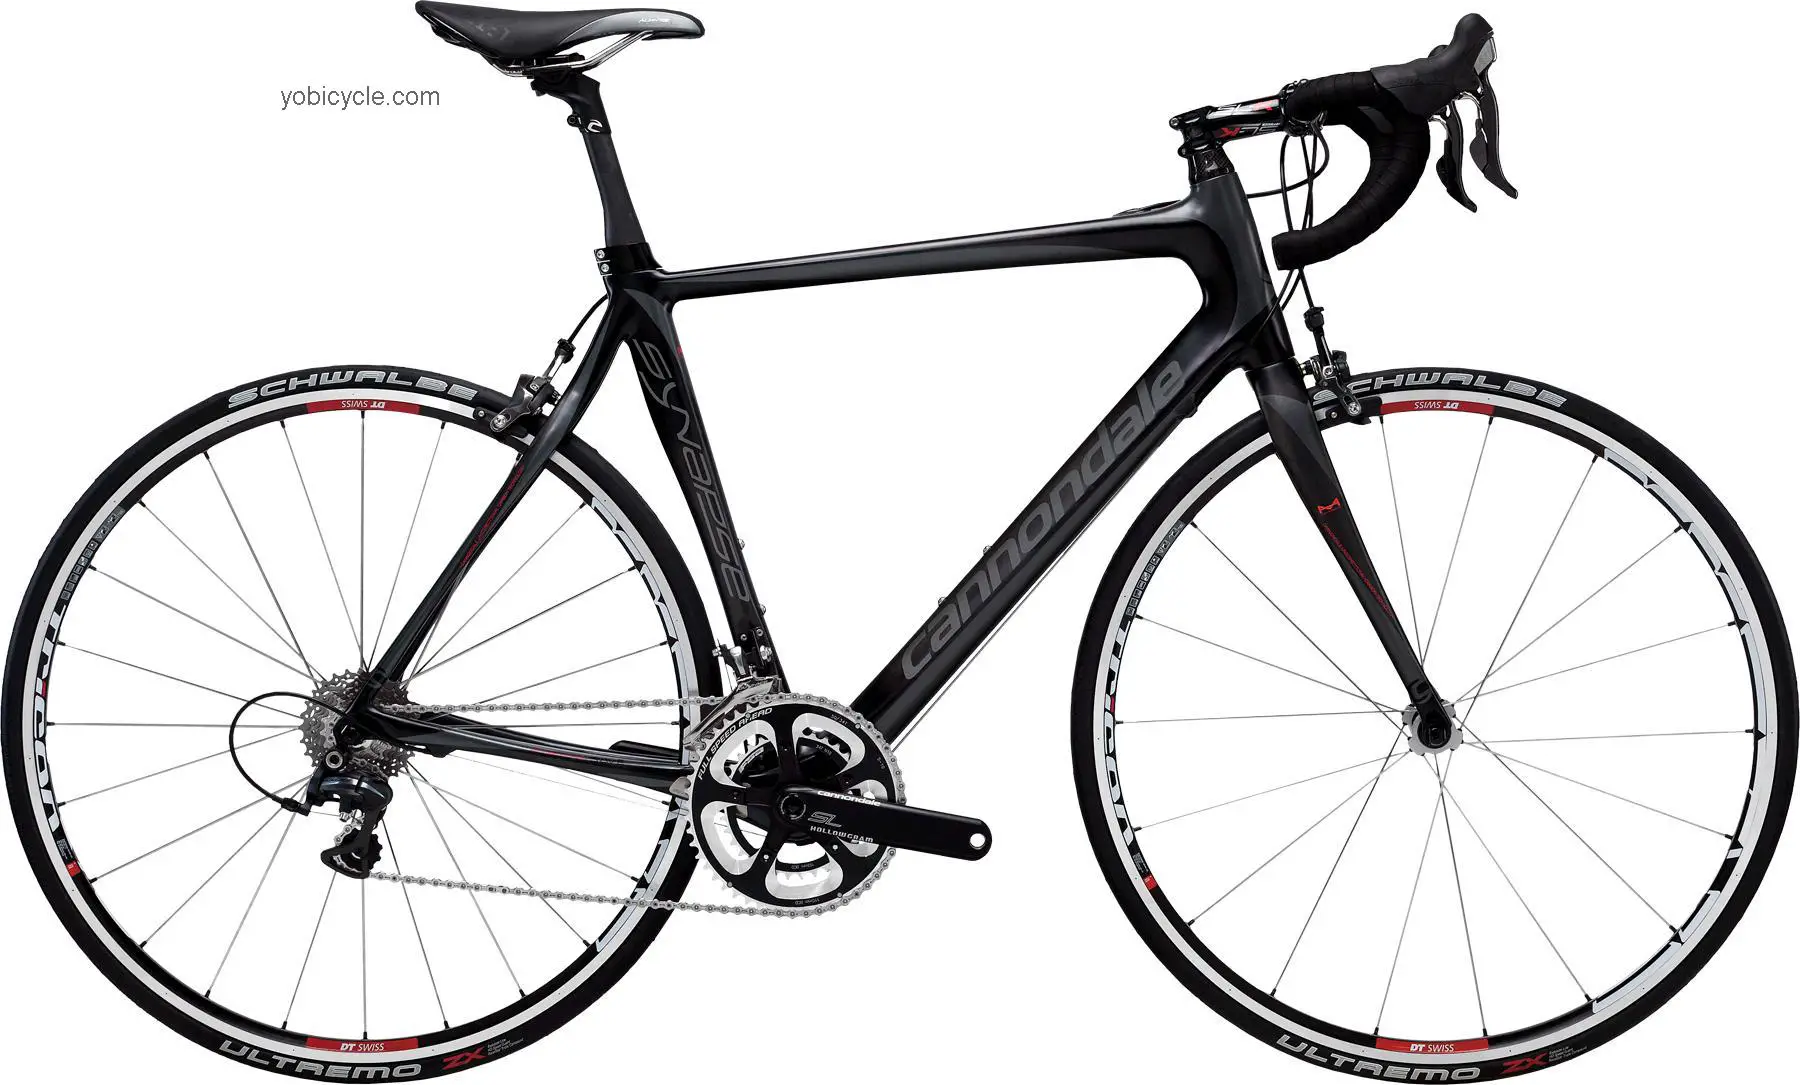 Cannondale Synapse Hi-Mod 1 Dura-Ace competitors and comparison tool online specs and performance